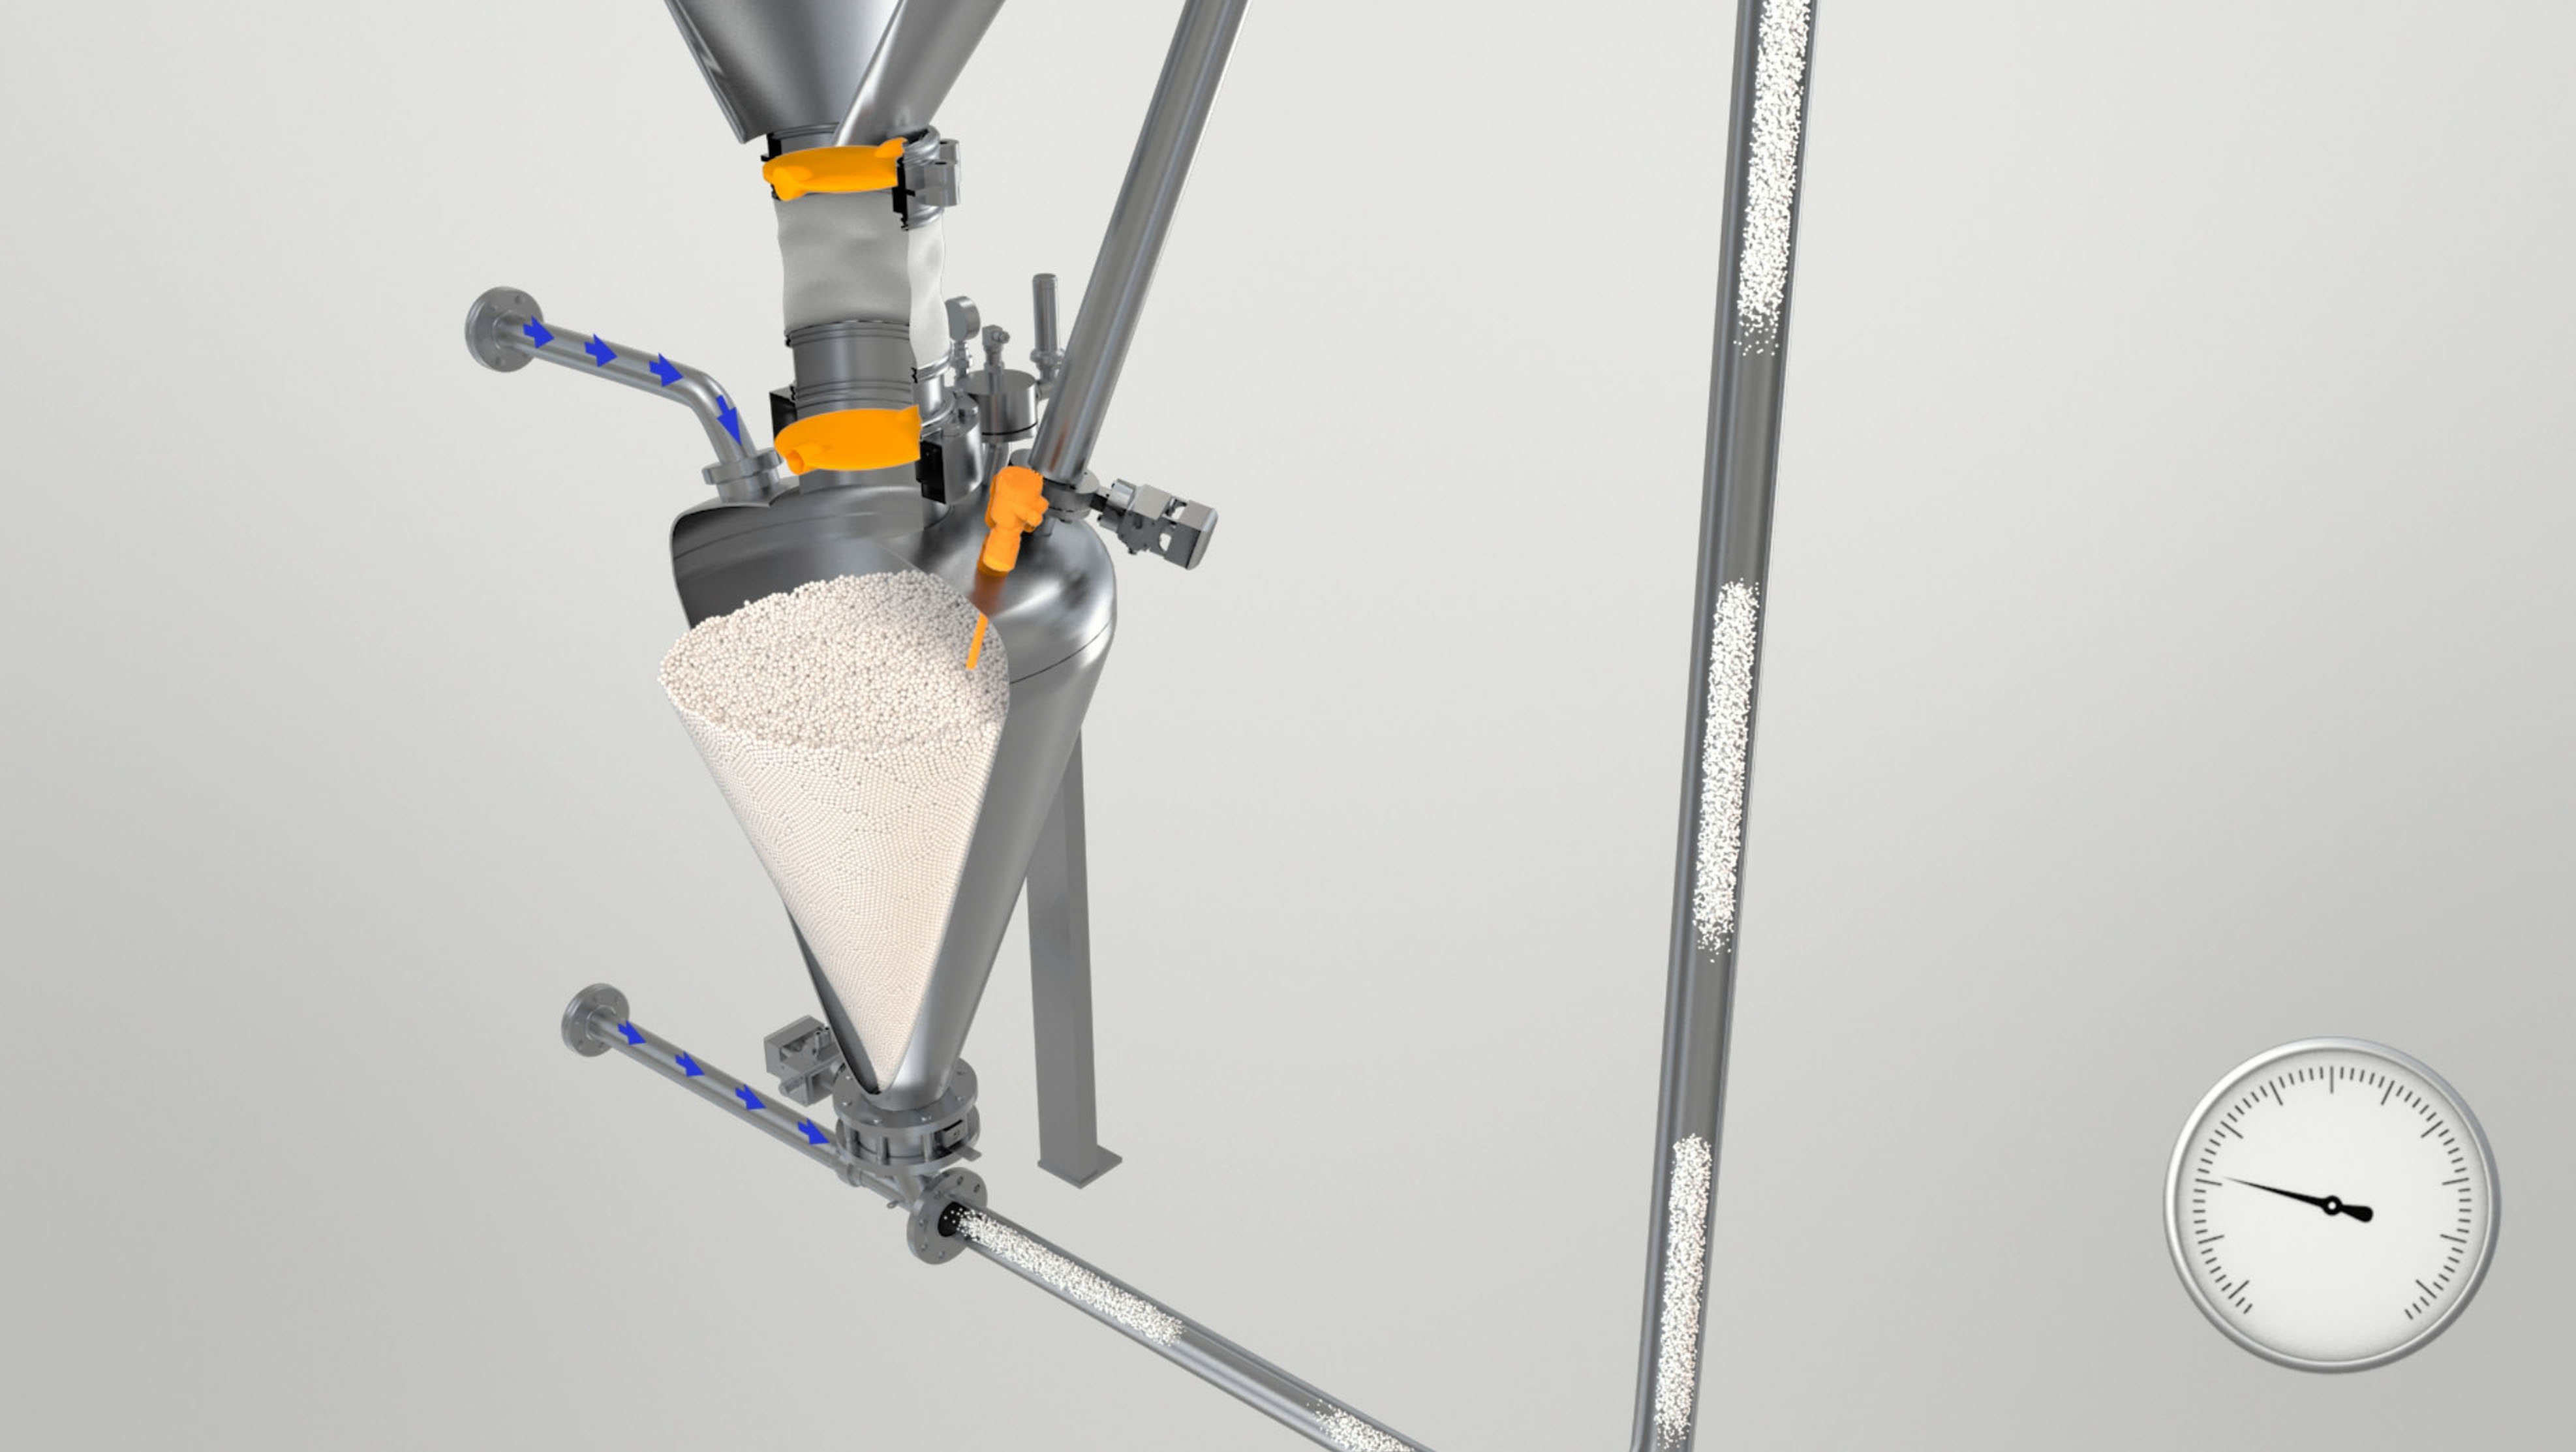 GERICKE Dense Phase Conveying System in a 3D Animation